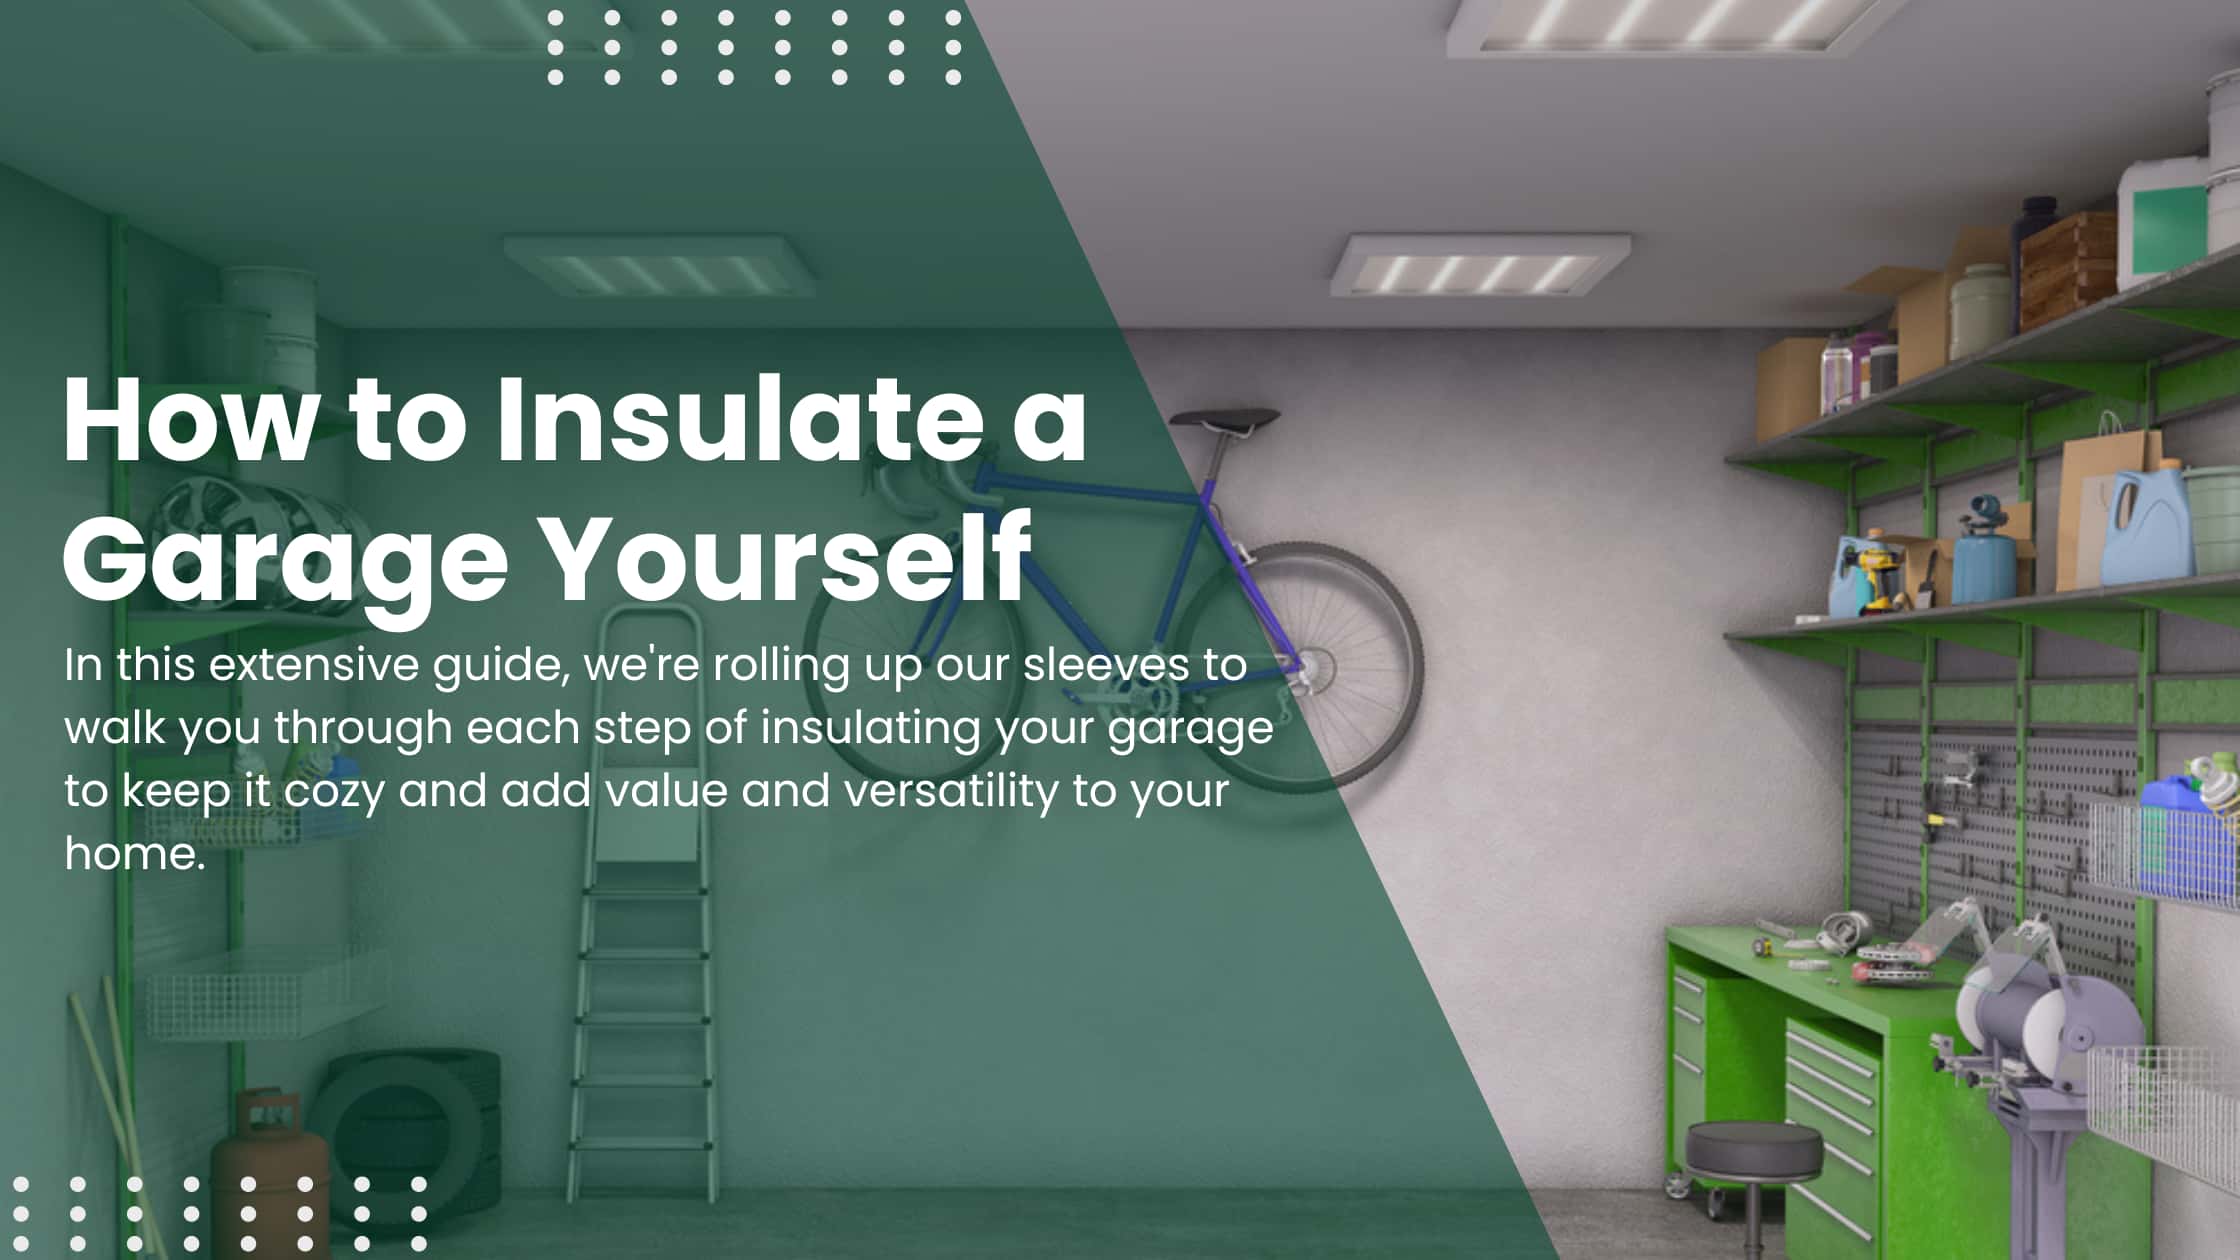 How to Insulate a Garage Yourself